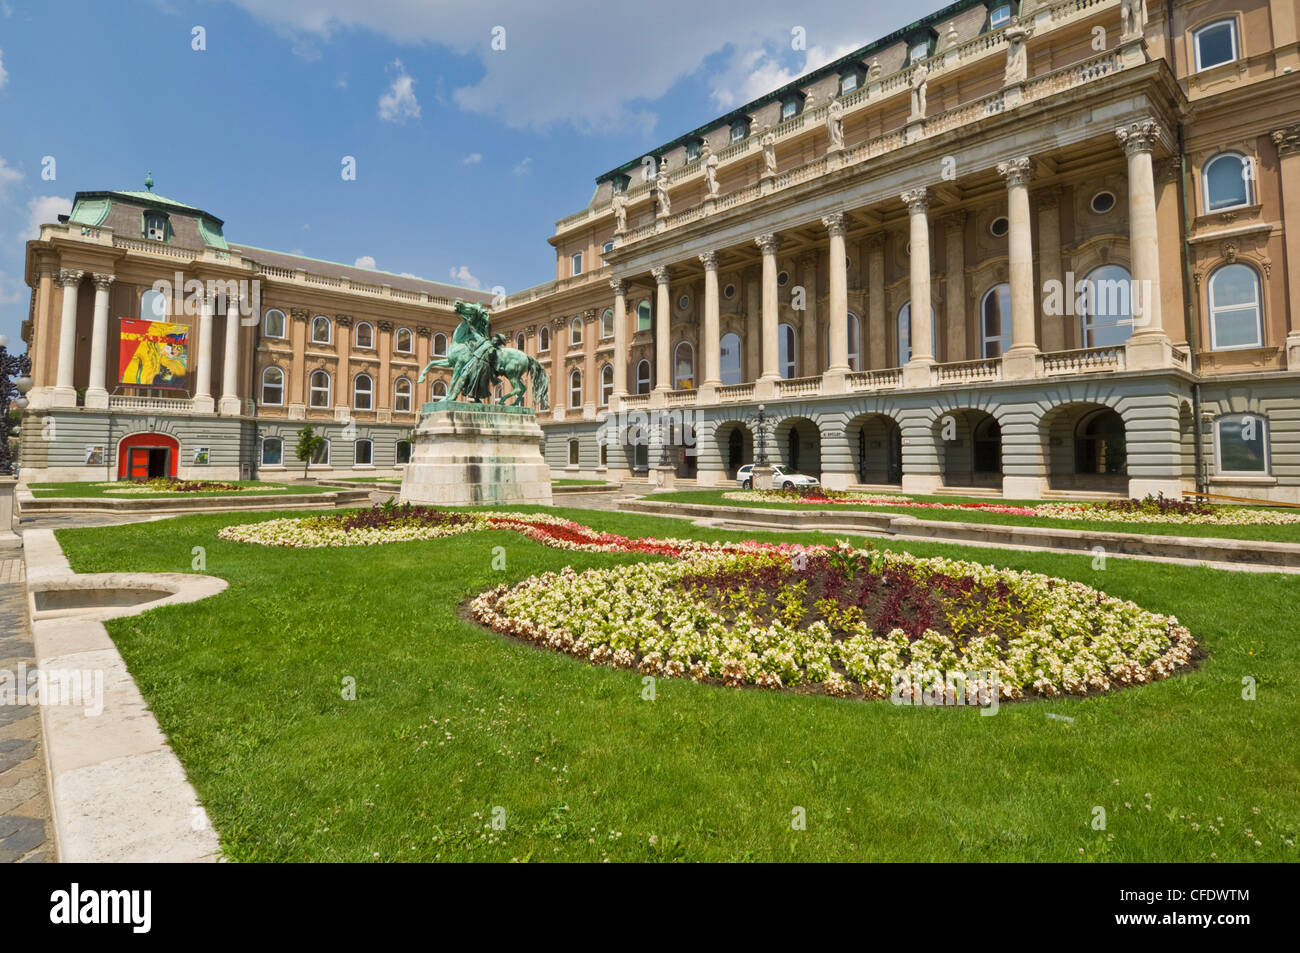 Rear entrance to the Hungarian National Gallery with equestrian statue, Budapest, Hungary, Europe Stock Photo